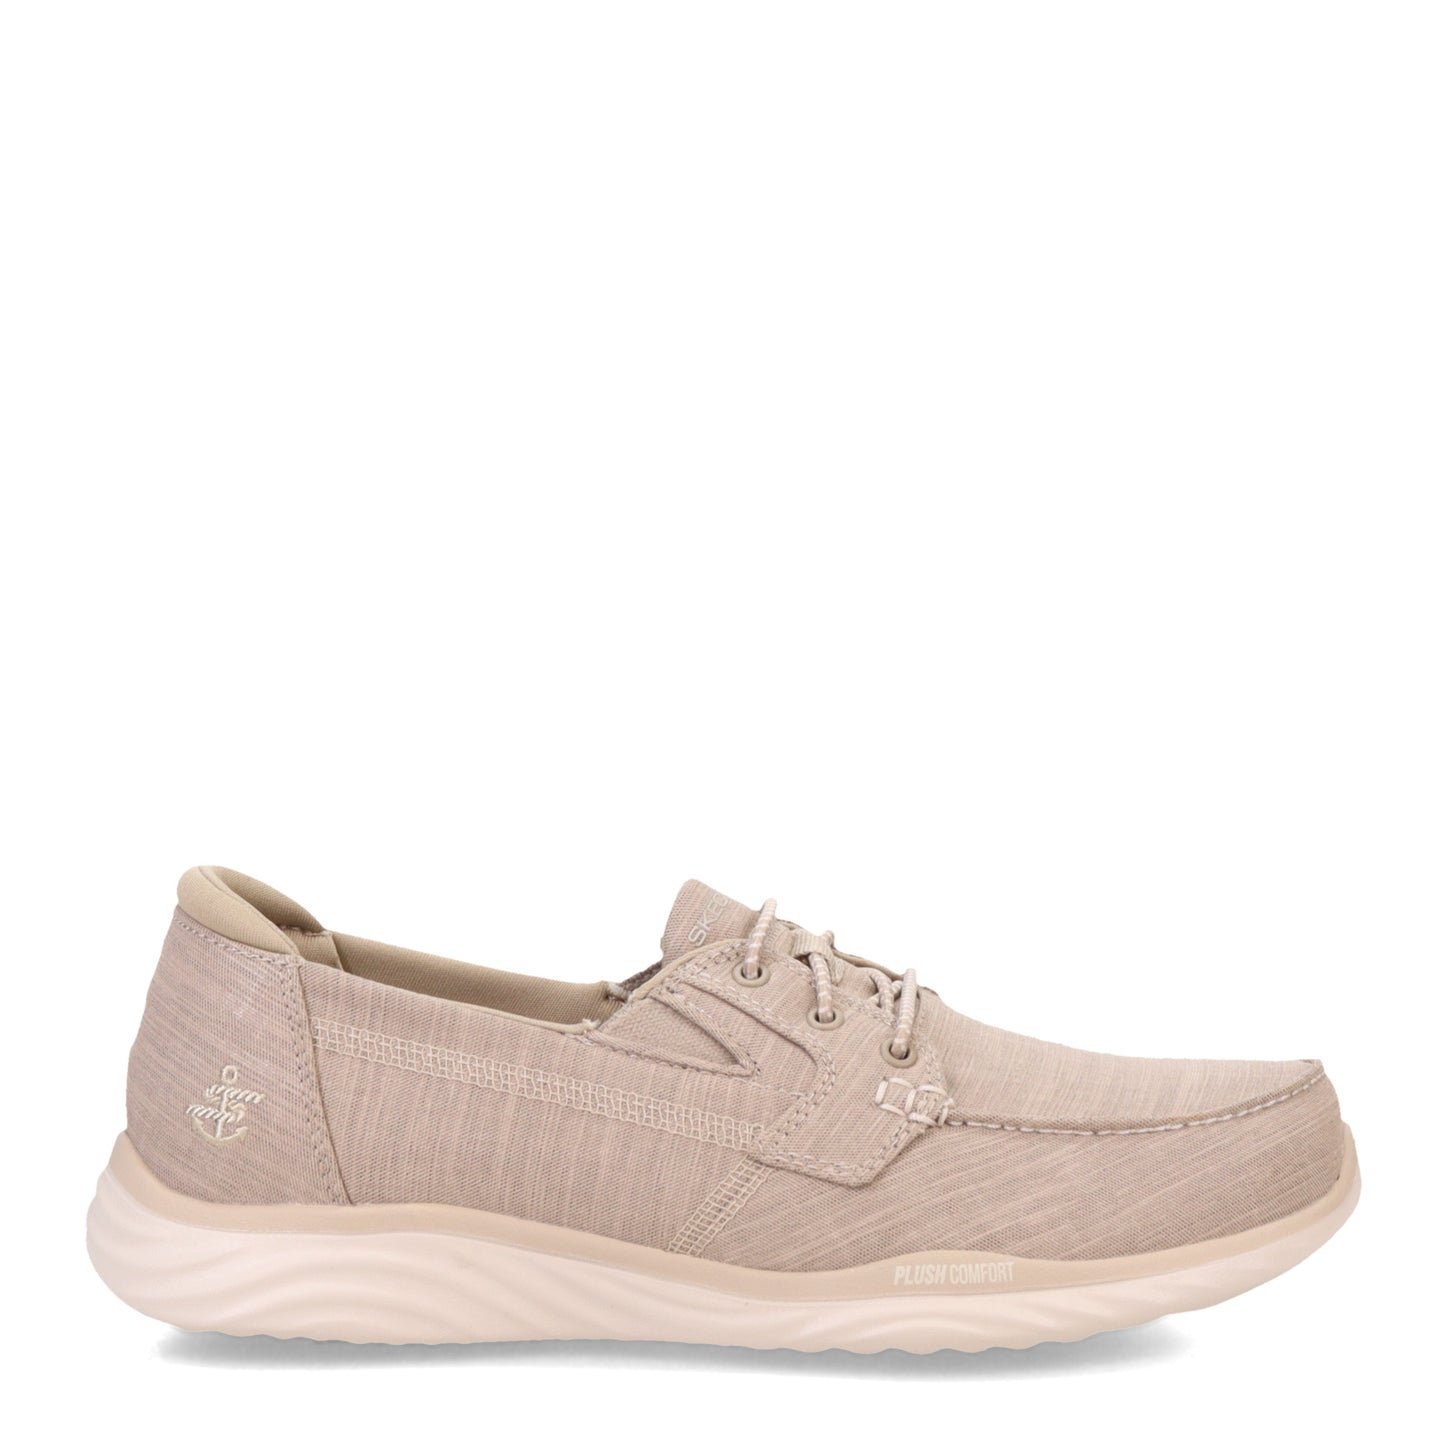 Peltz Shoes  Women's Skechers On the GO Ideal Costal Slip-On Taupe 137080-TPE